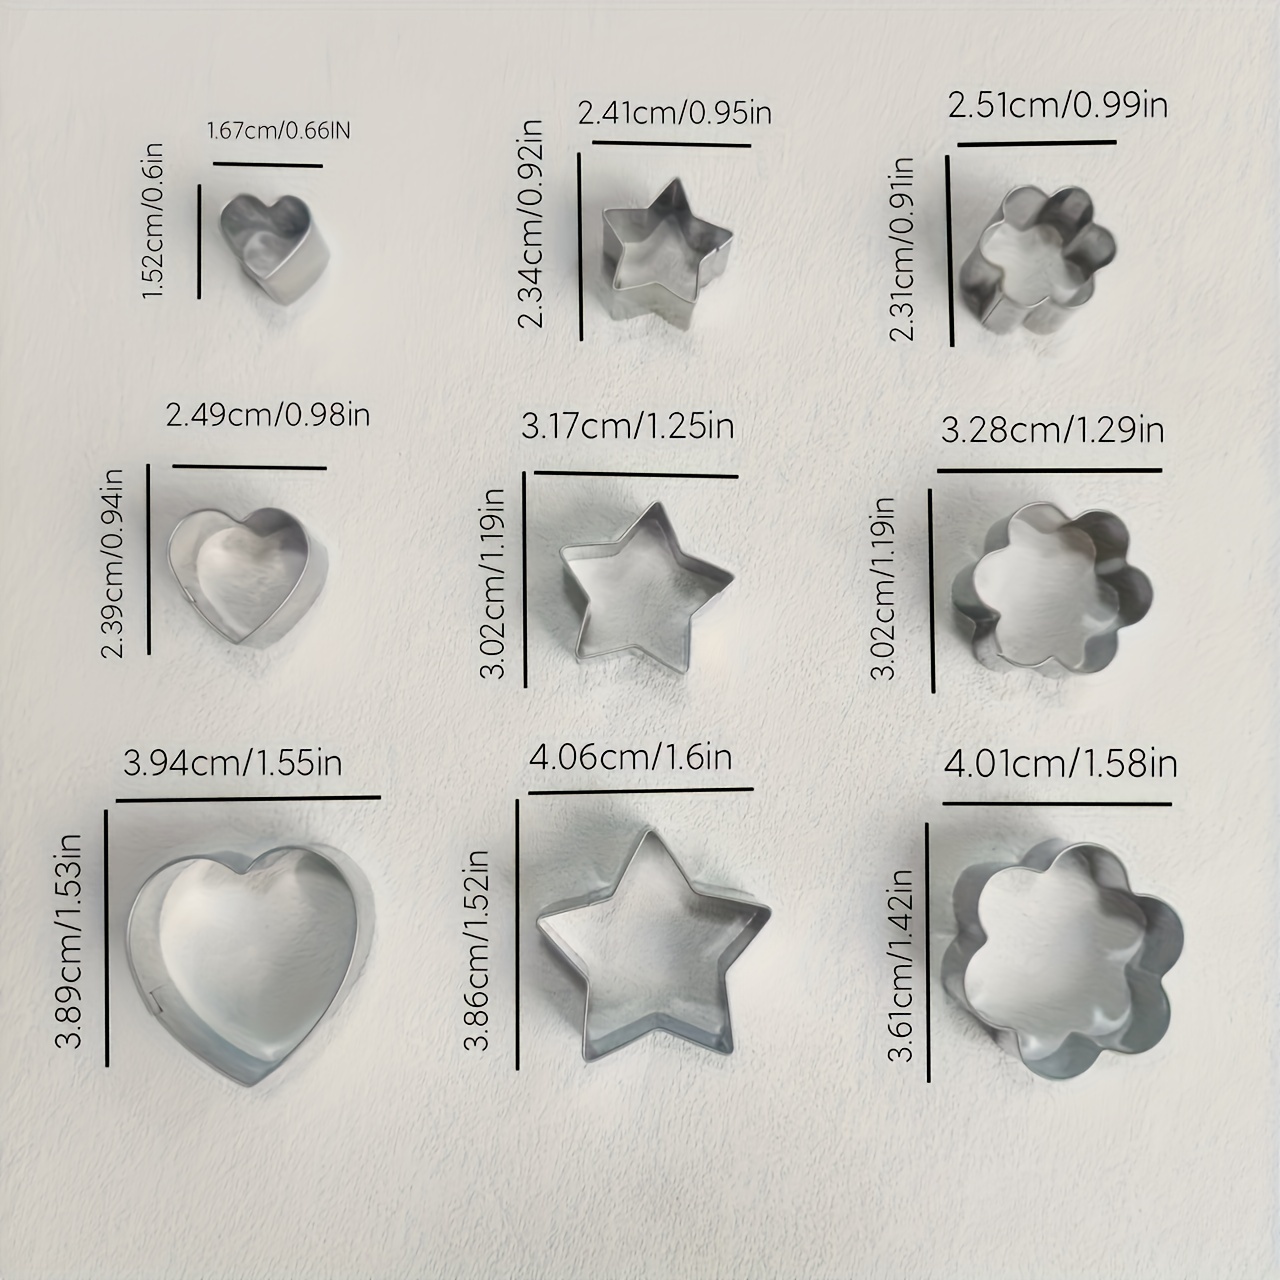 Mini Cookie Cutter Shapes Set - 24 Pieces Stainless Steel Metal Small Molds - Flower, Heart, Star, Geometric Shapes - Cut Fondant, Pastry, Mousse Cake